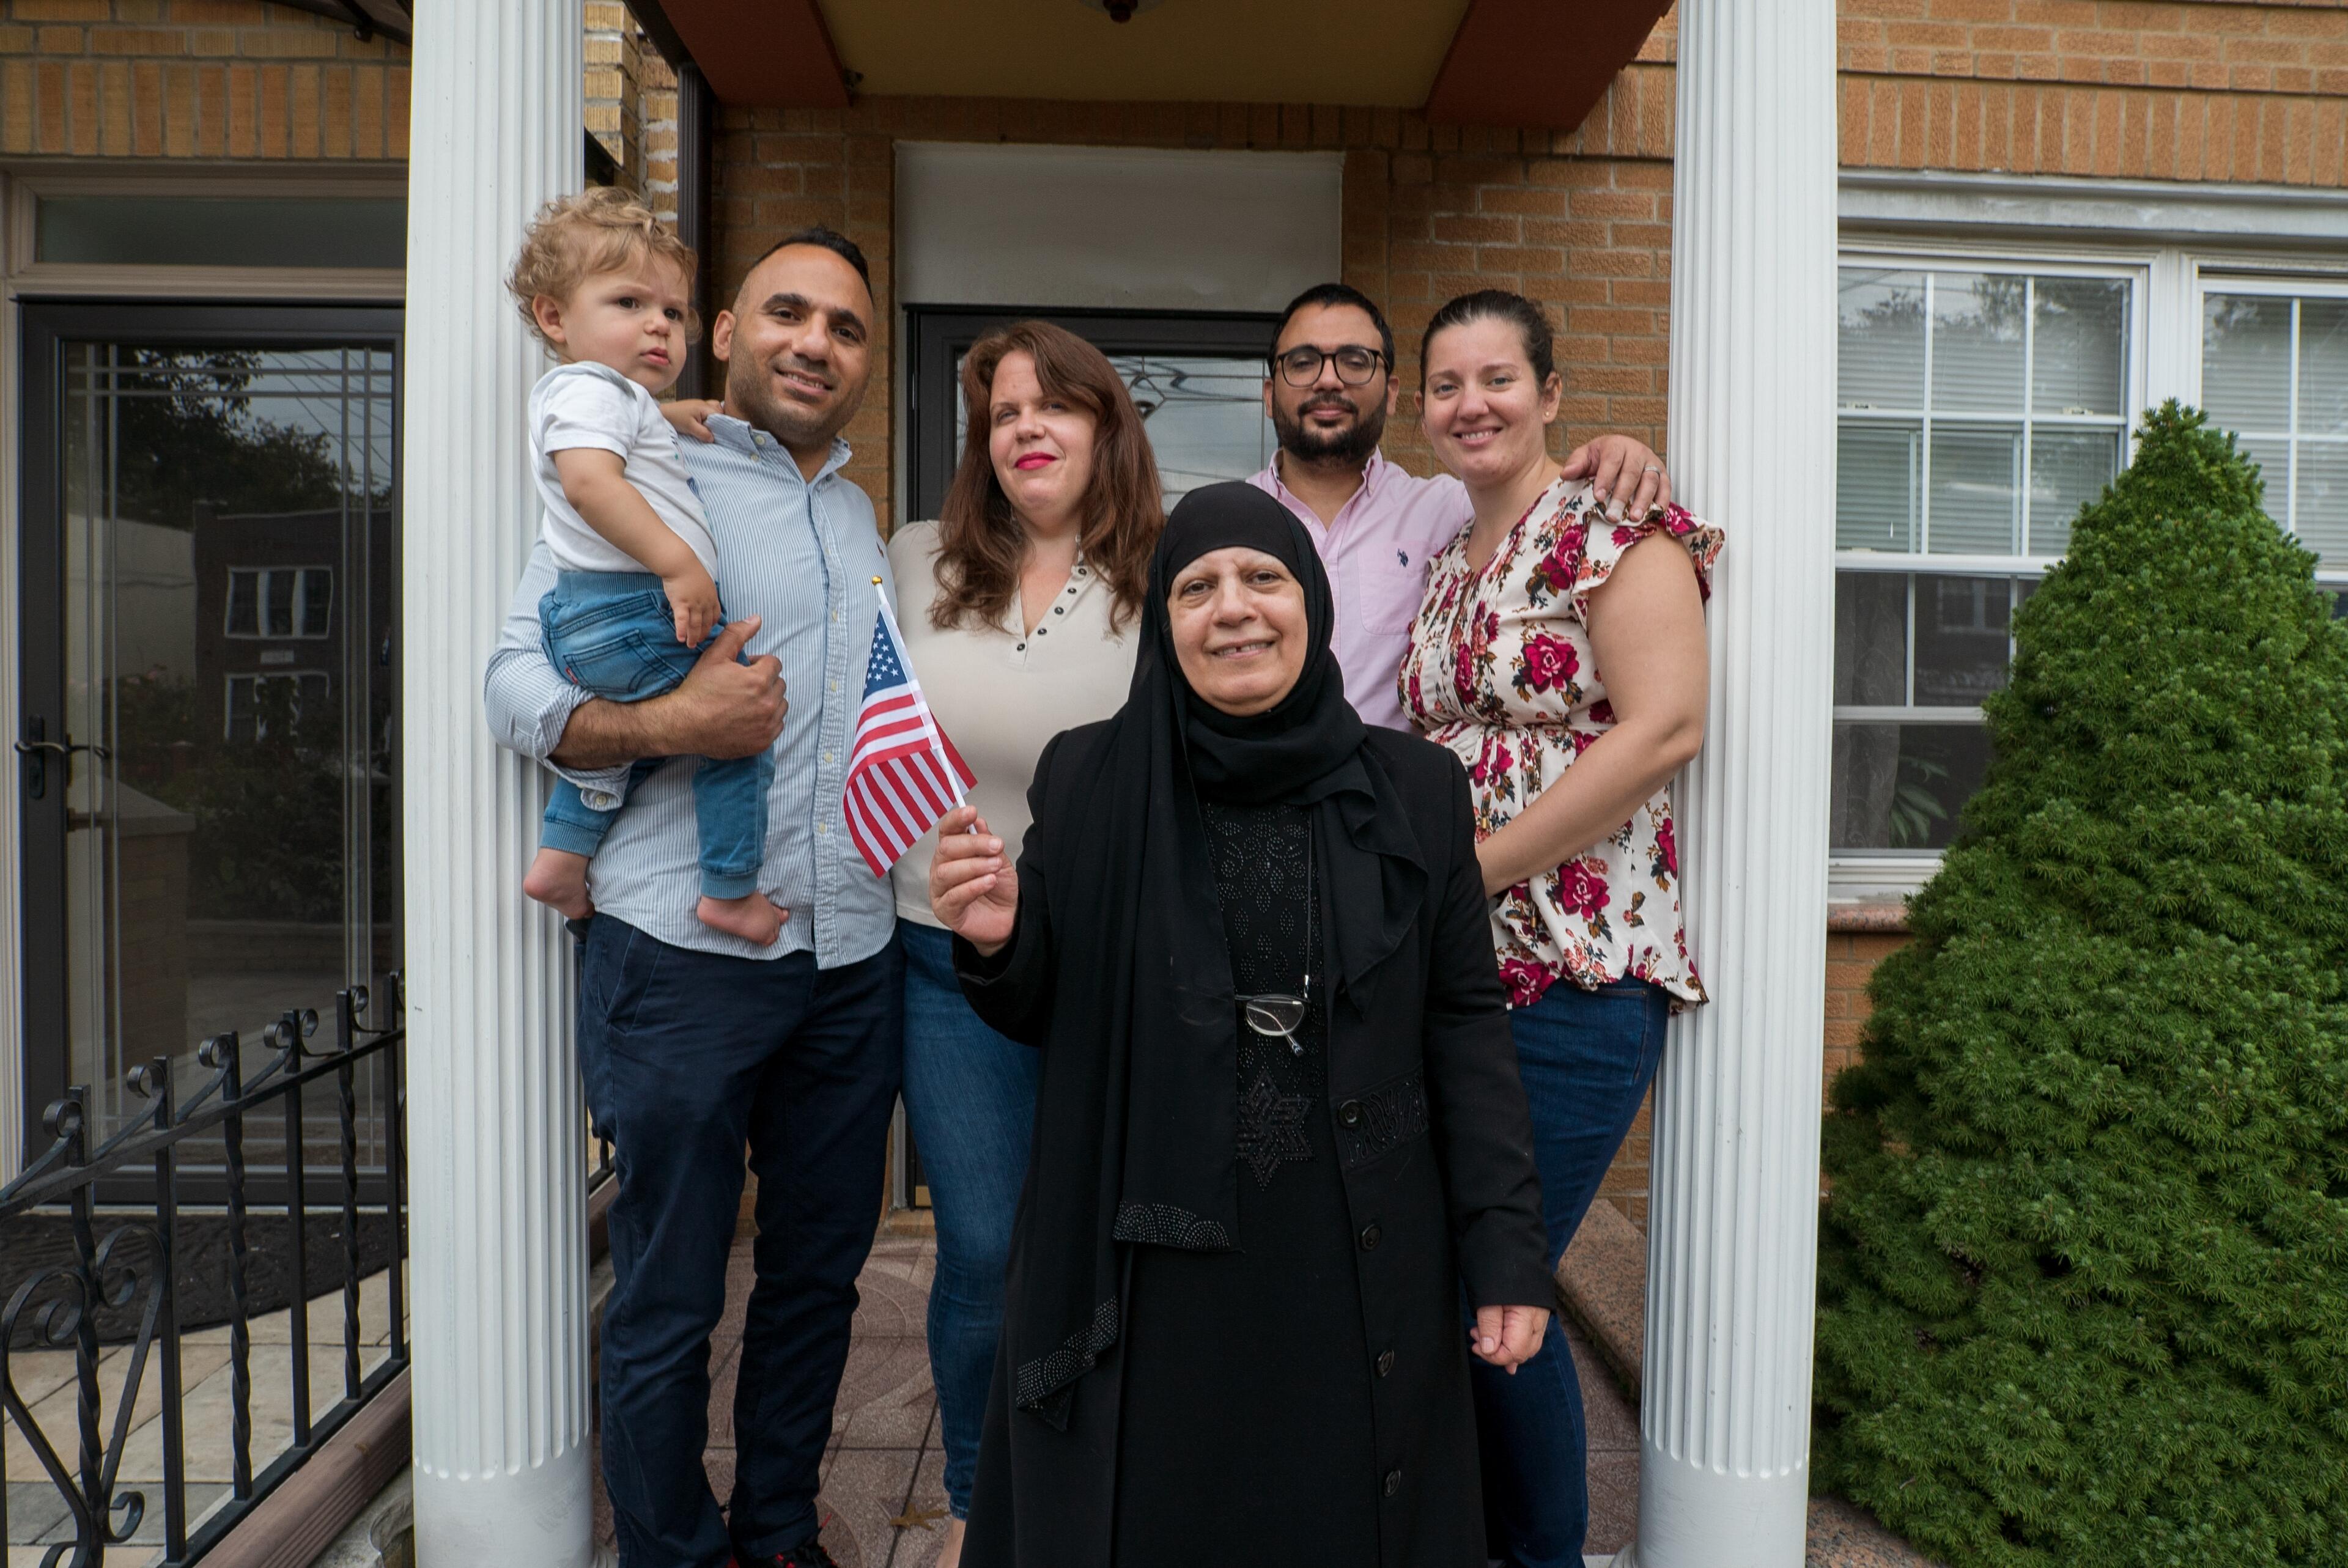 Maha al-Obaidi, 66, stands with her family outside their home in New York. 